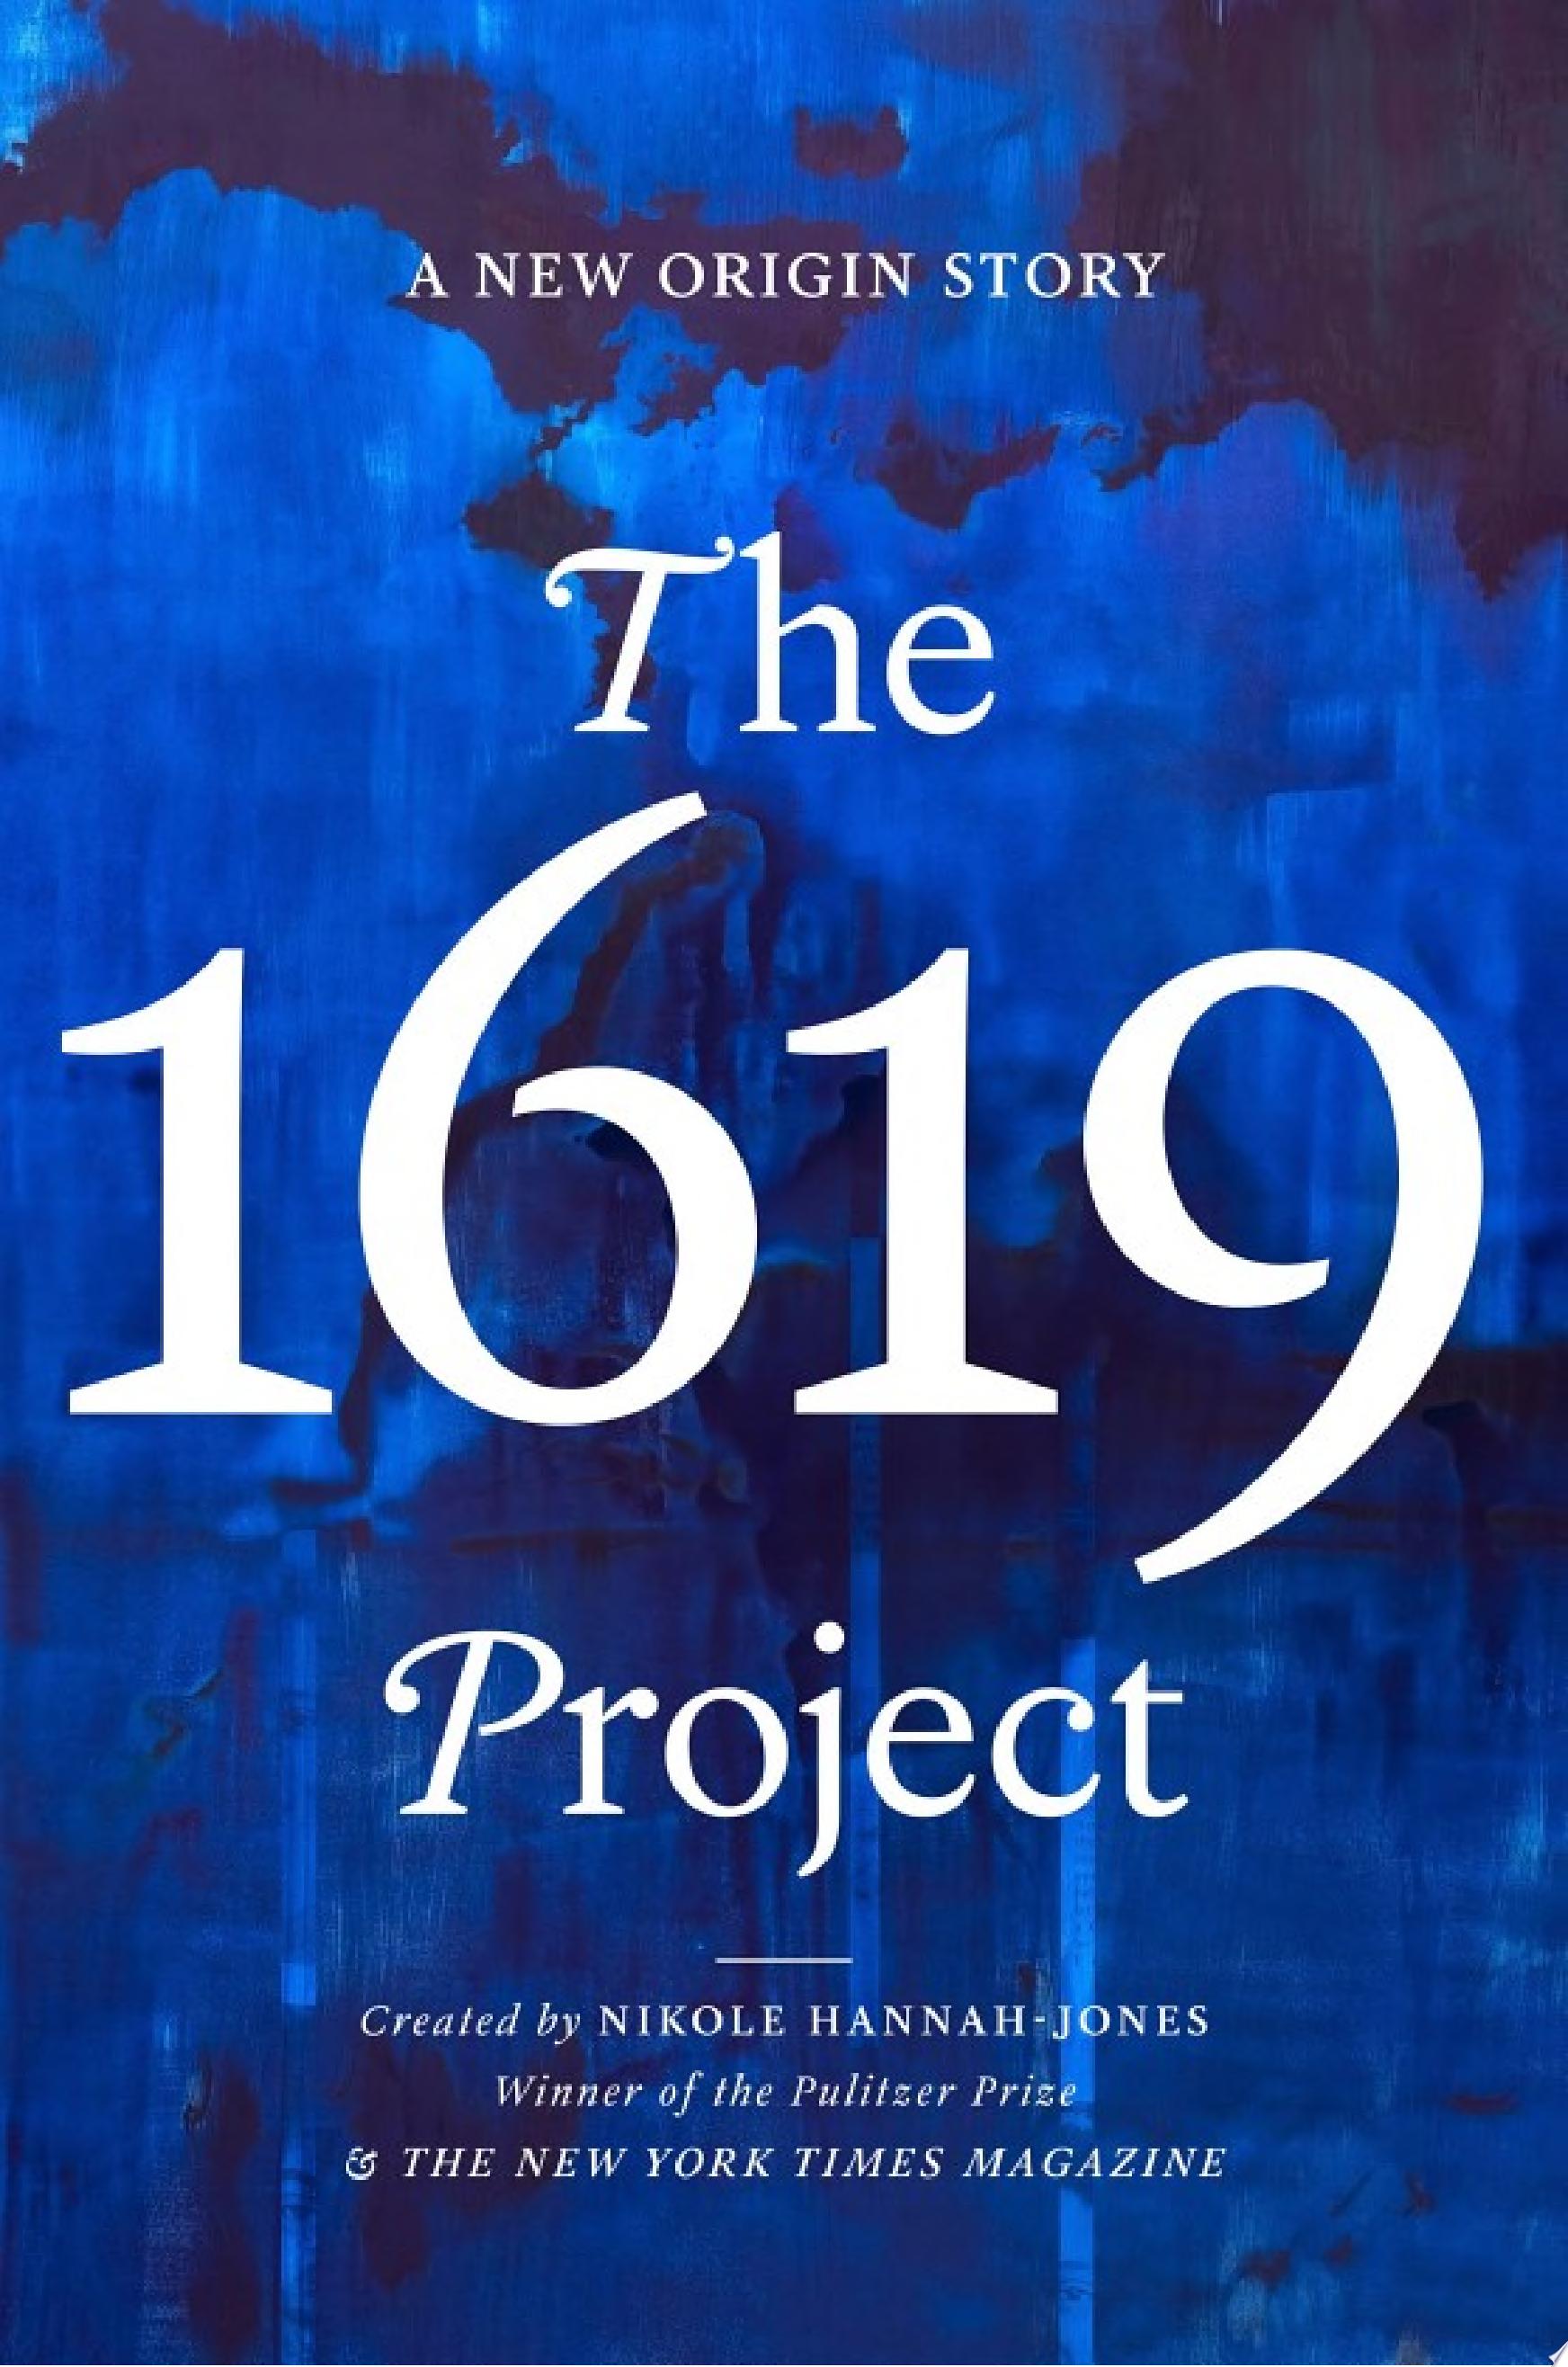 Image for "The 1619 Project"